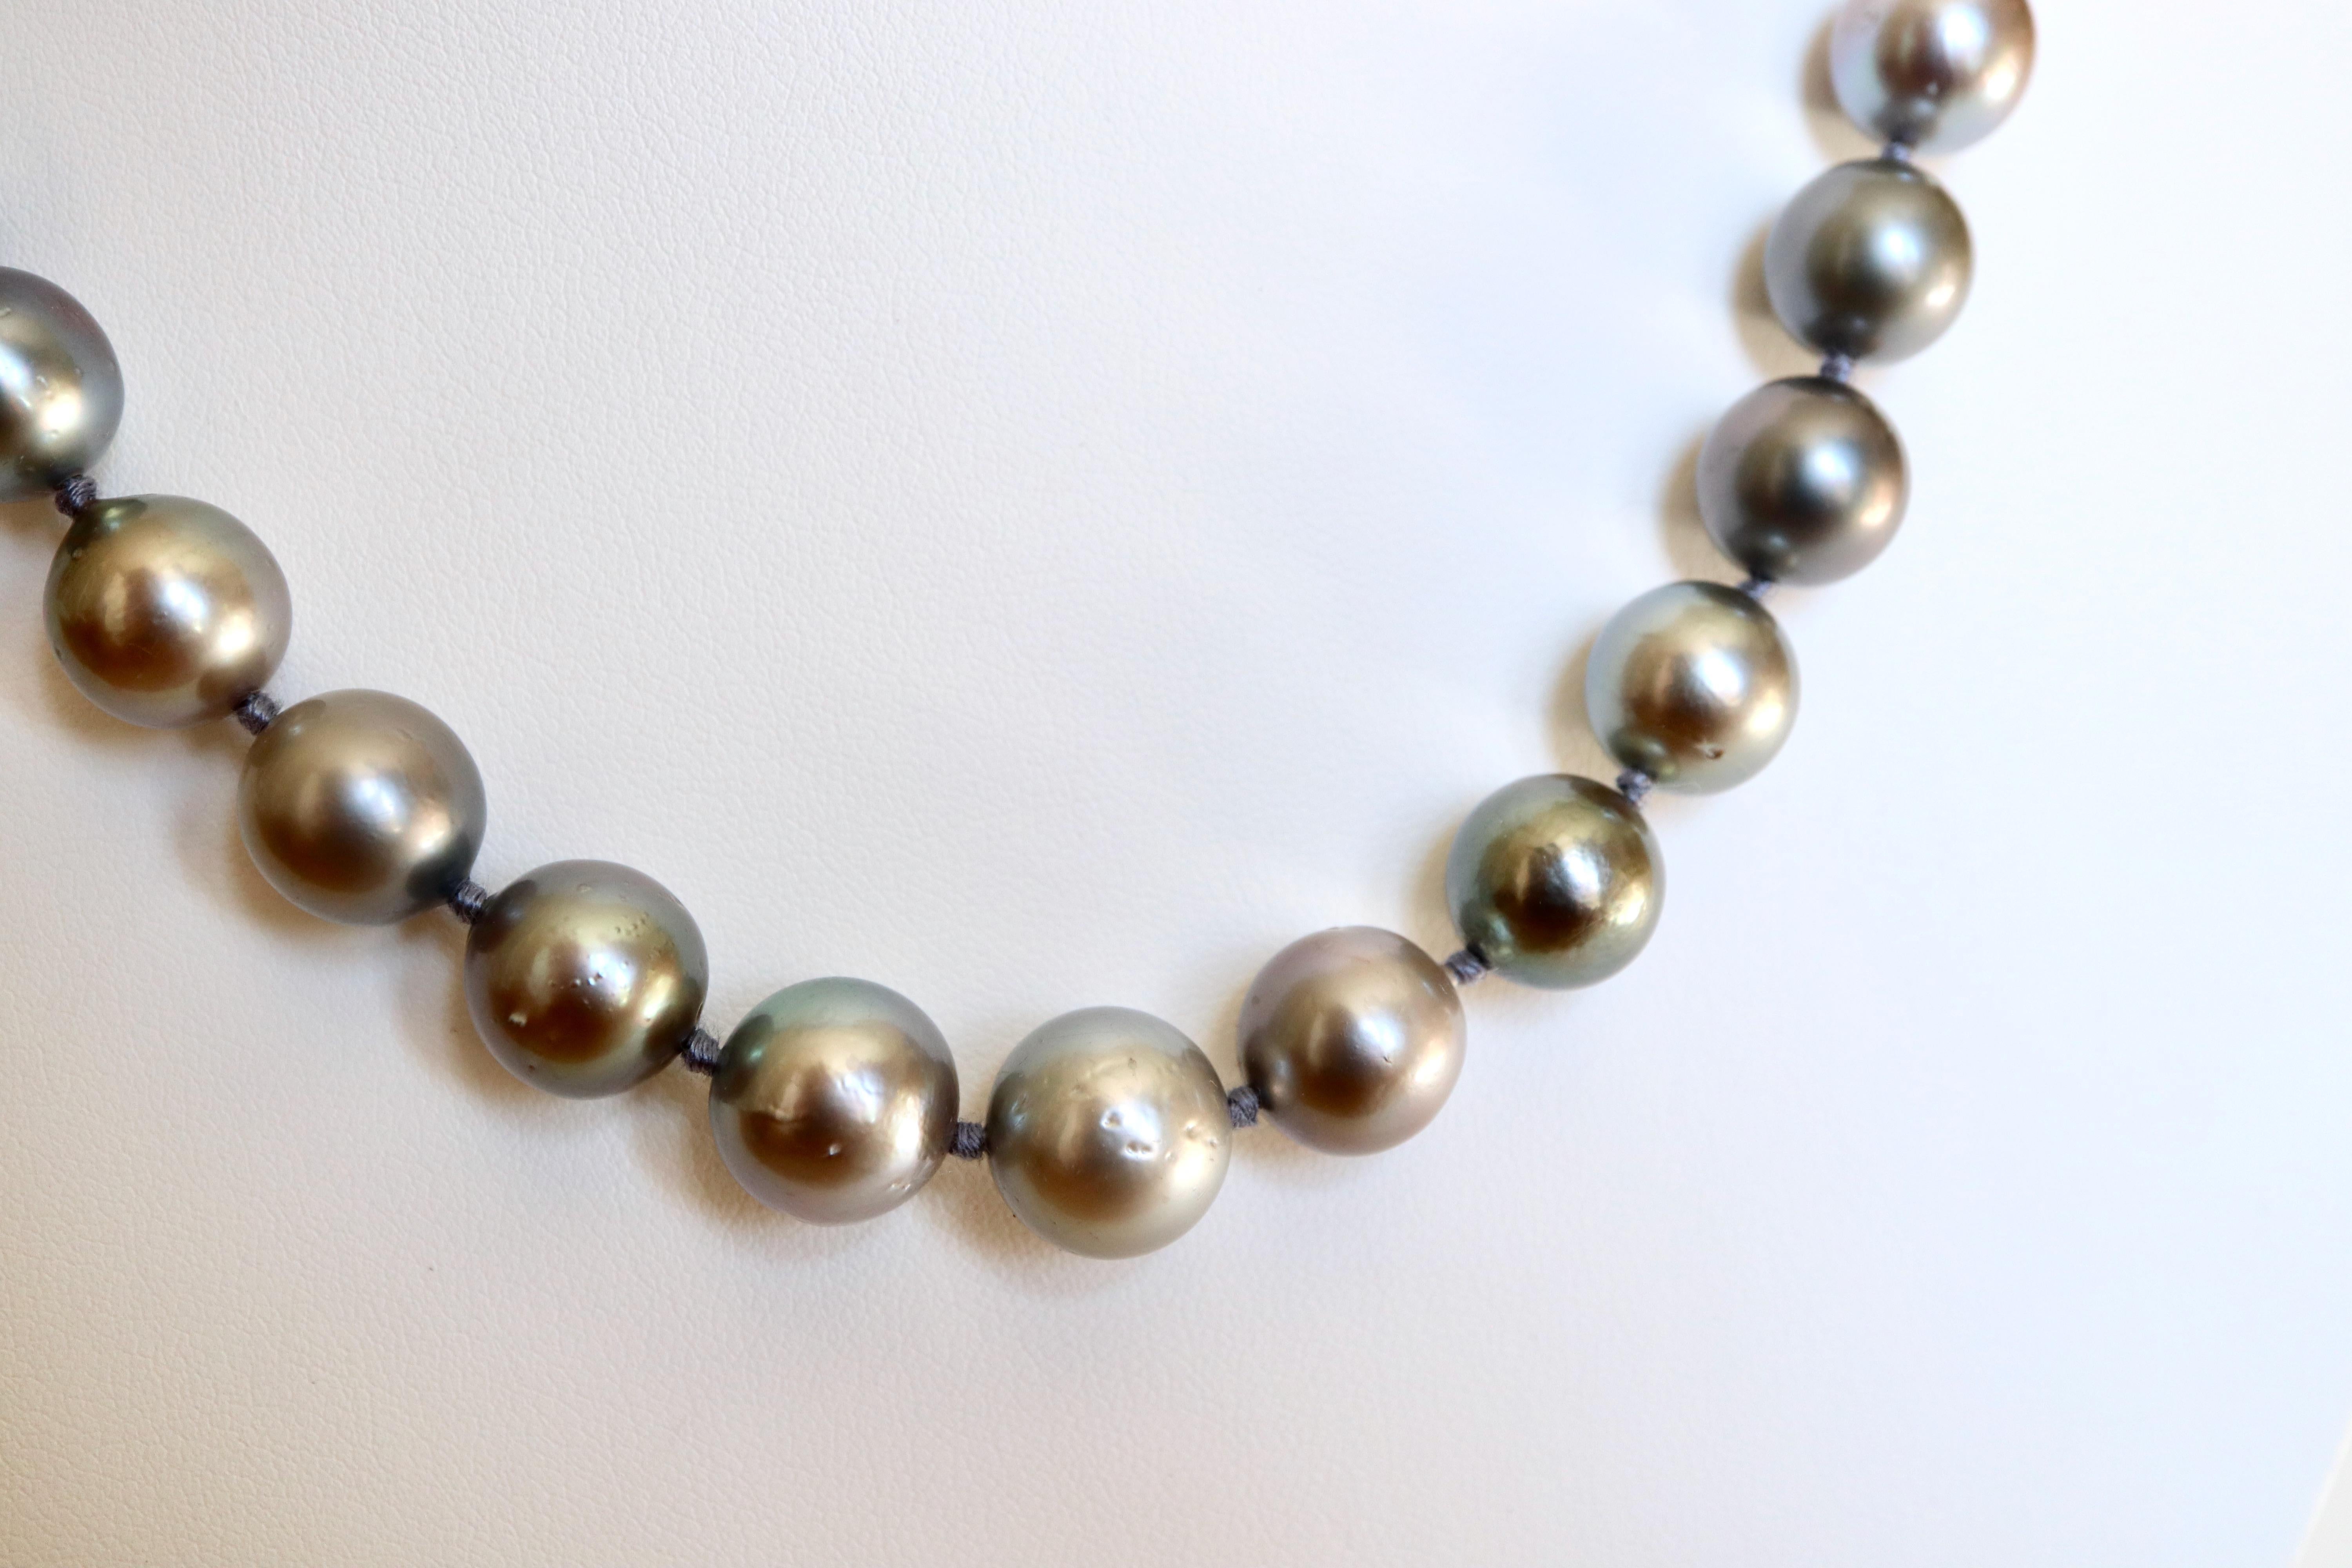 Grey South Sea Cultured Pearl Necklace, Tumbled Pearl Necklace with Invisible Pierced Pearl Clasp.
38 gray pearls: pearl diameter: 9 to 13 mm
Length: 48.5 cm
Gross weight: 73.2g